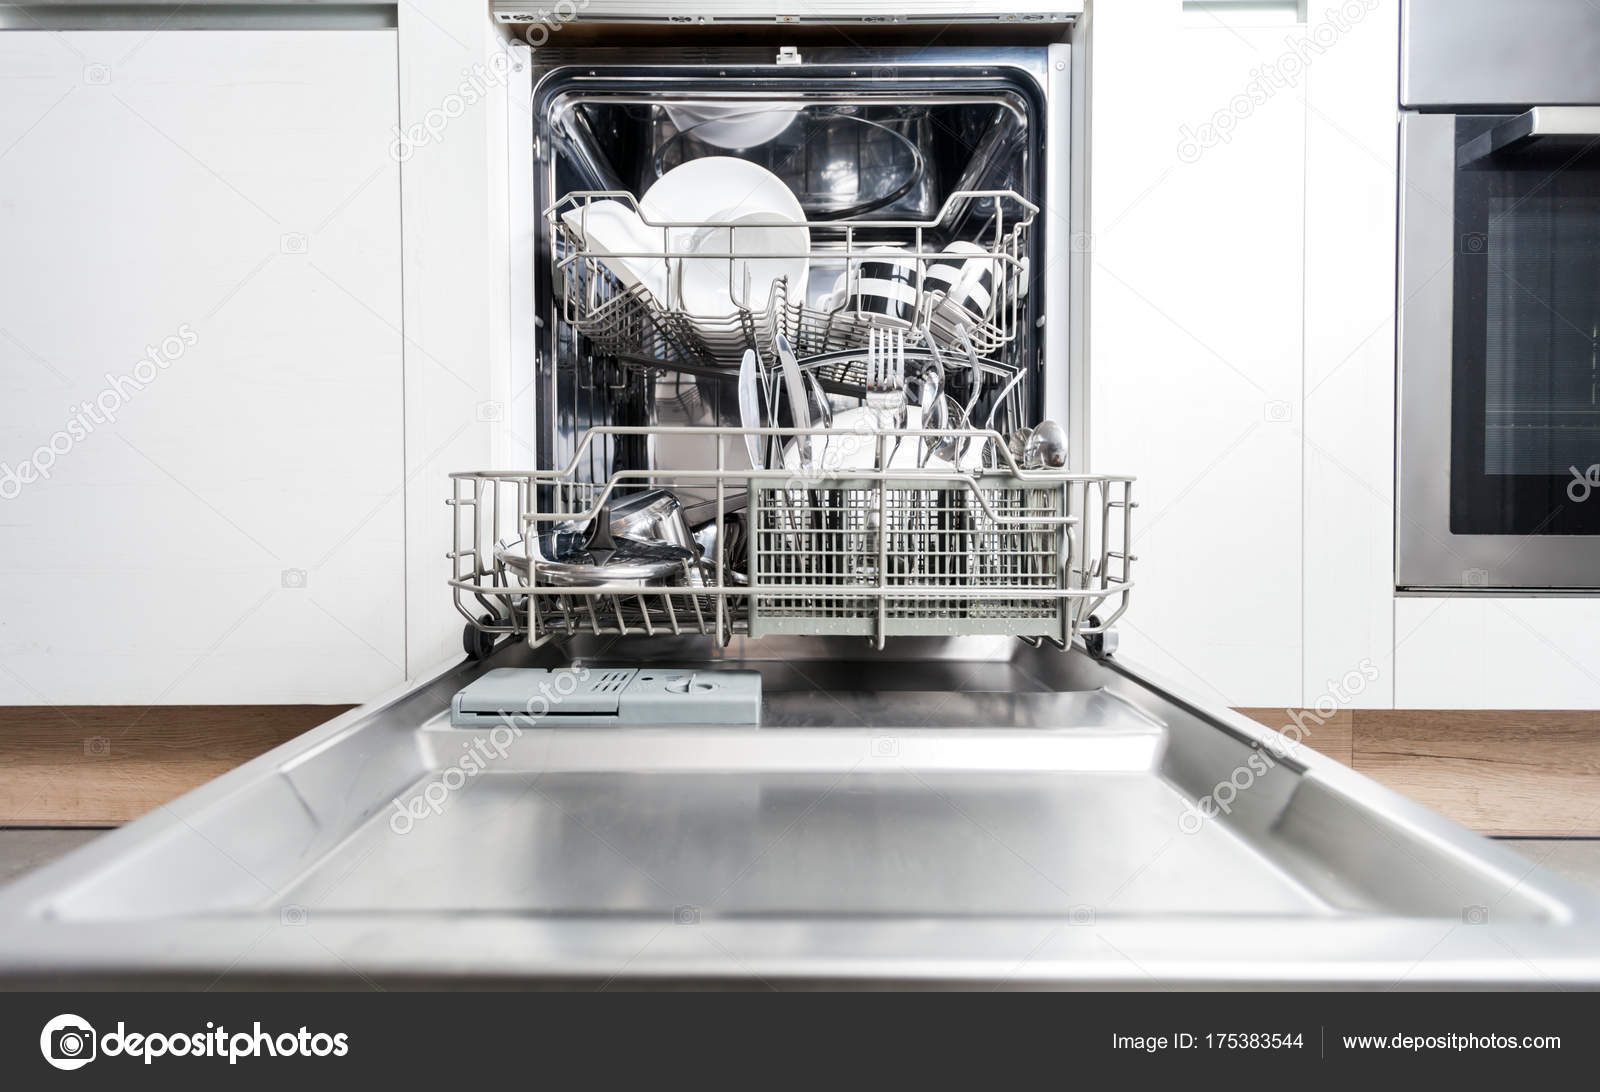 Clean dishes and accessories in dishwasher after washing Stock